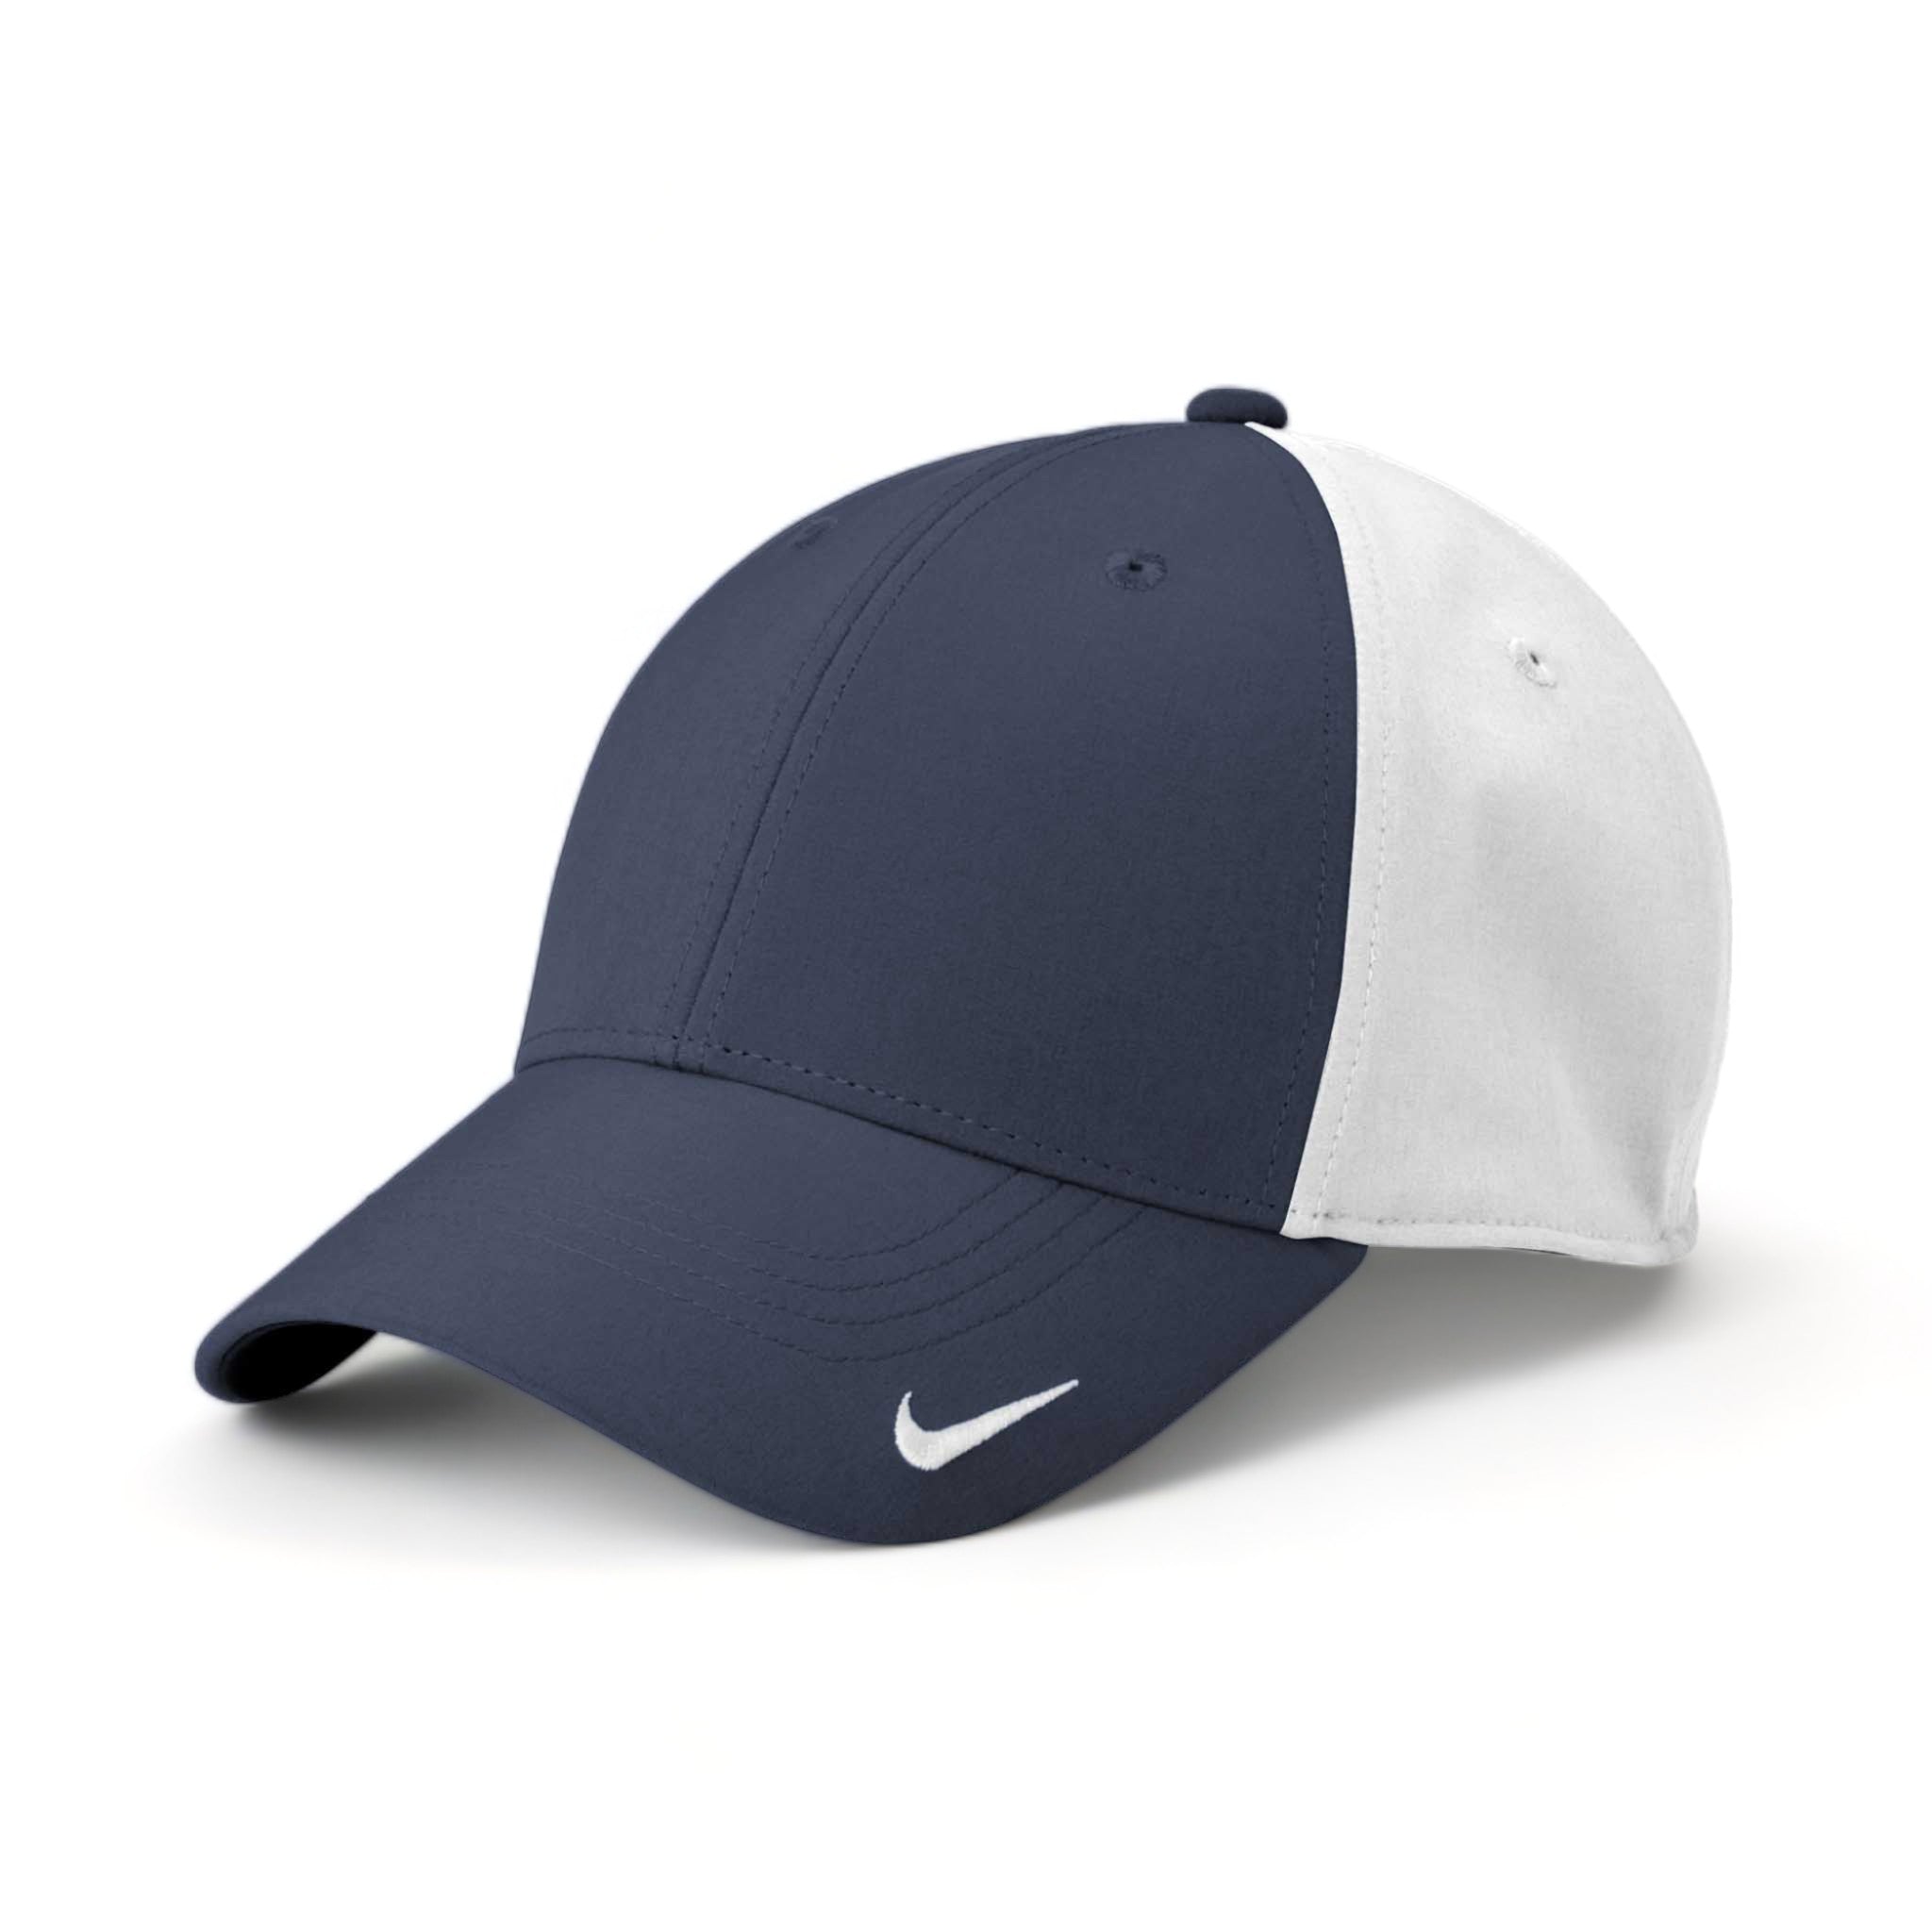 Side view of Nike NKFB6447 custom hat in navy and white